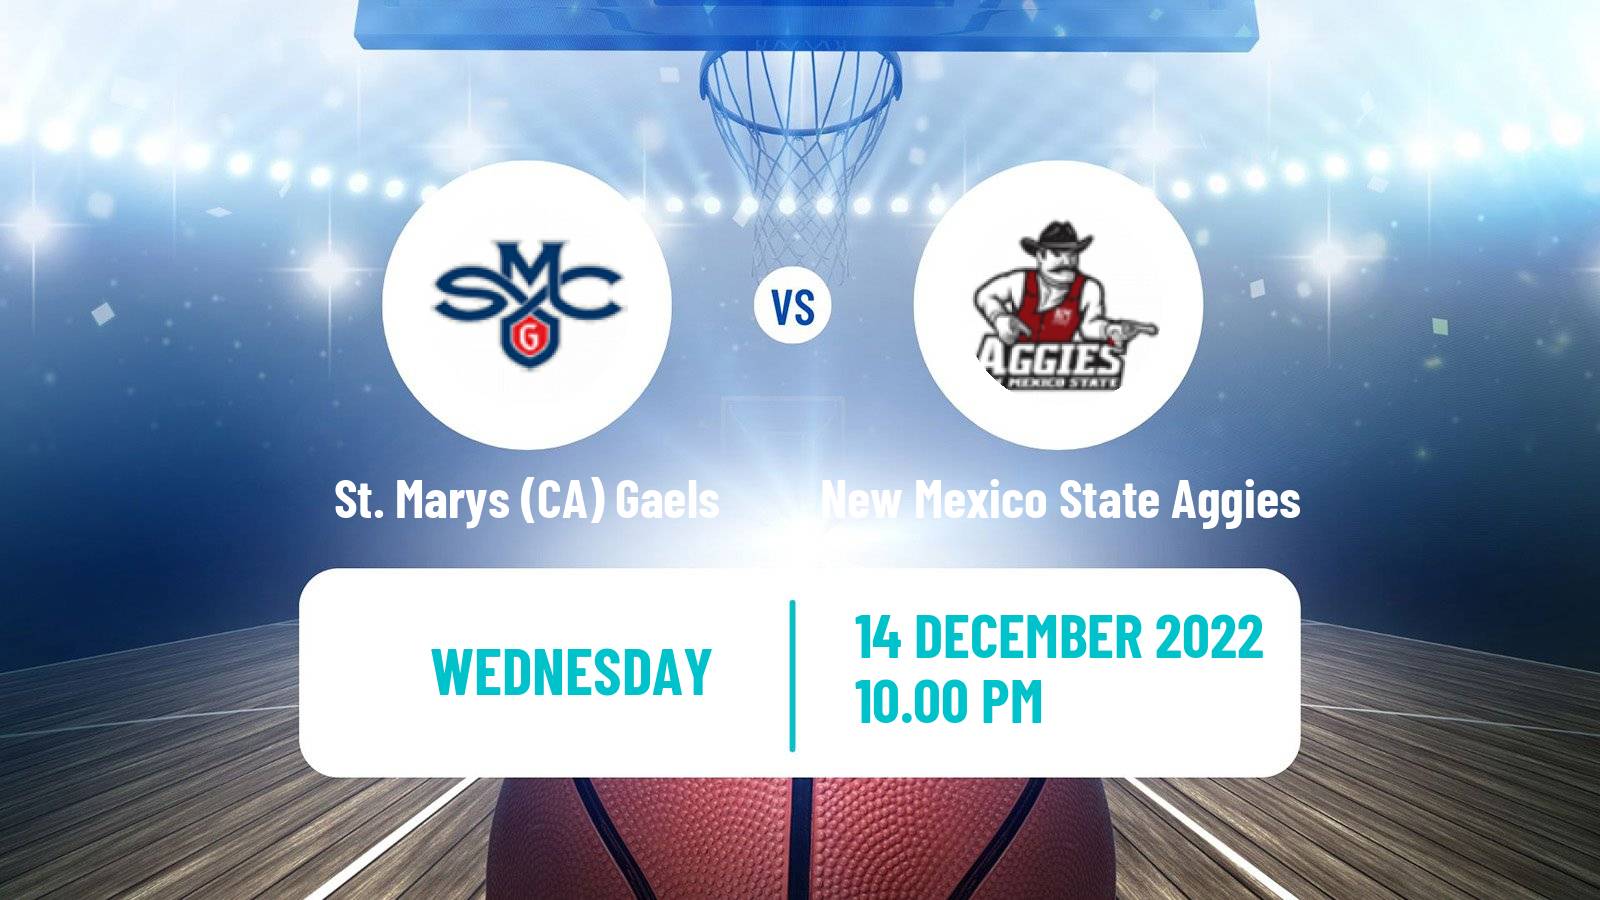 Basketball NCAA College Basketball St. Marys (CA) Gaels - New Mexico State Aggies